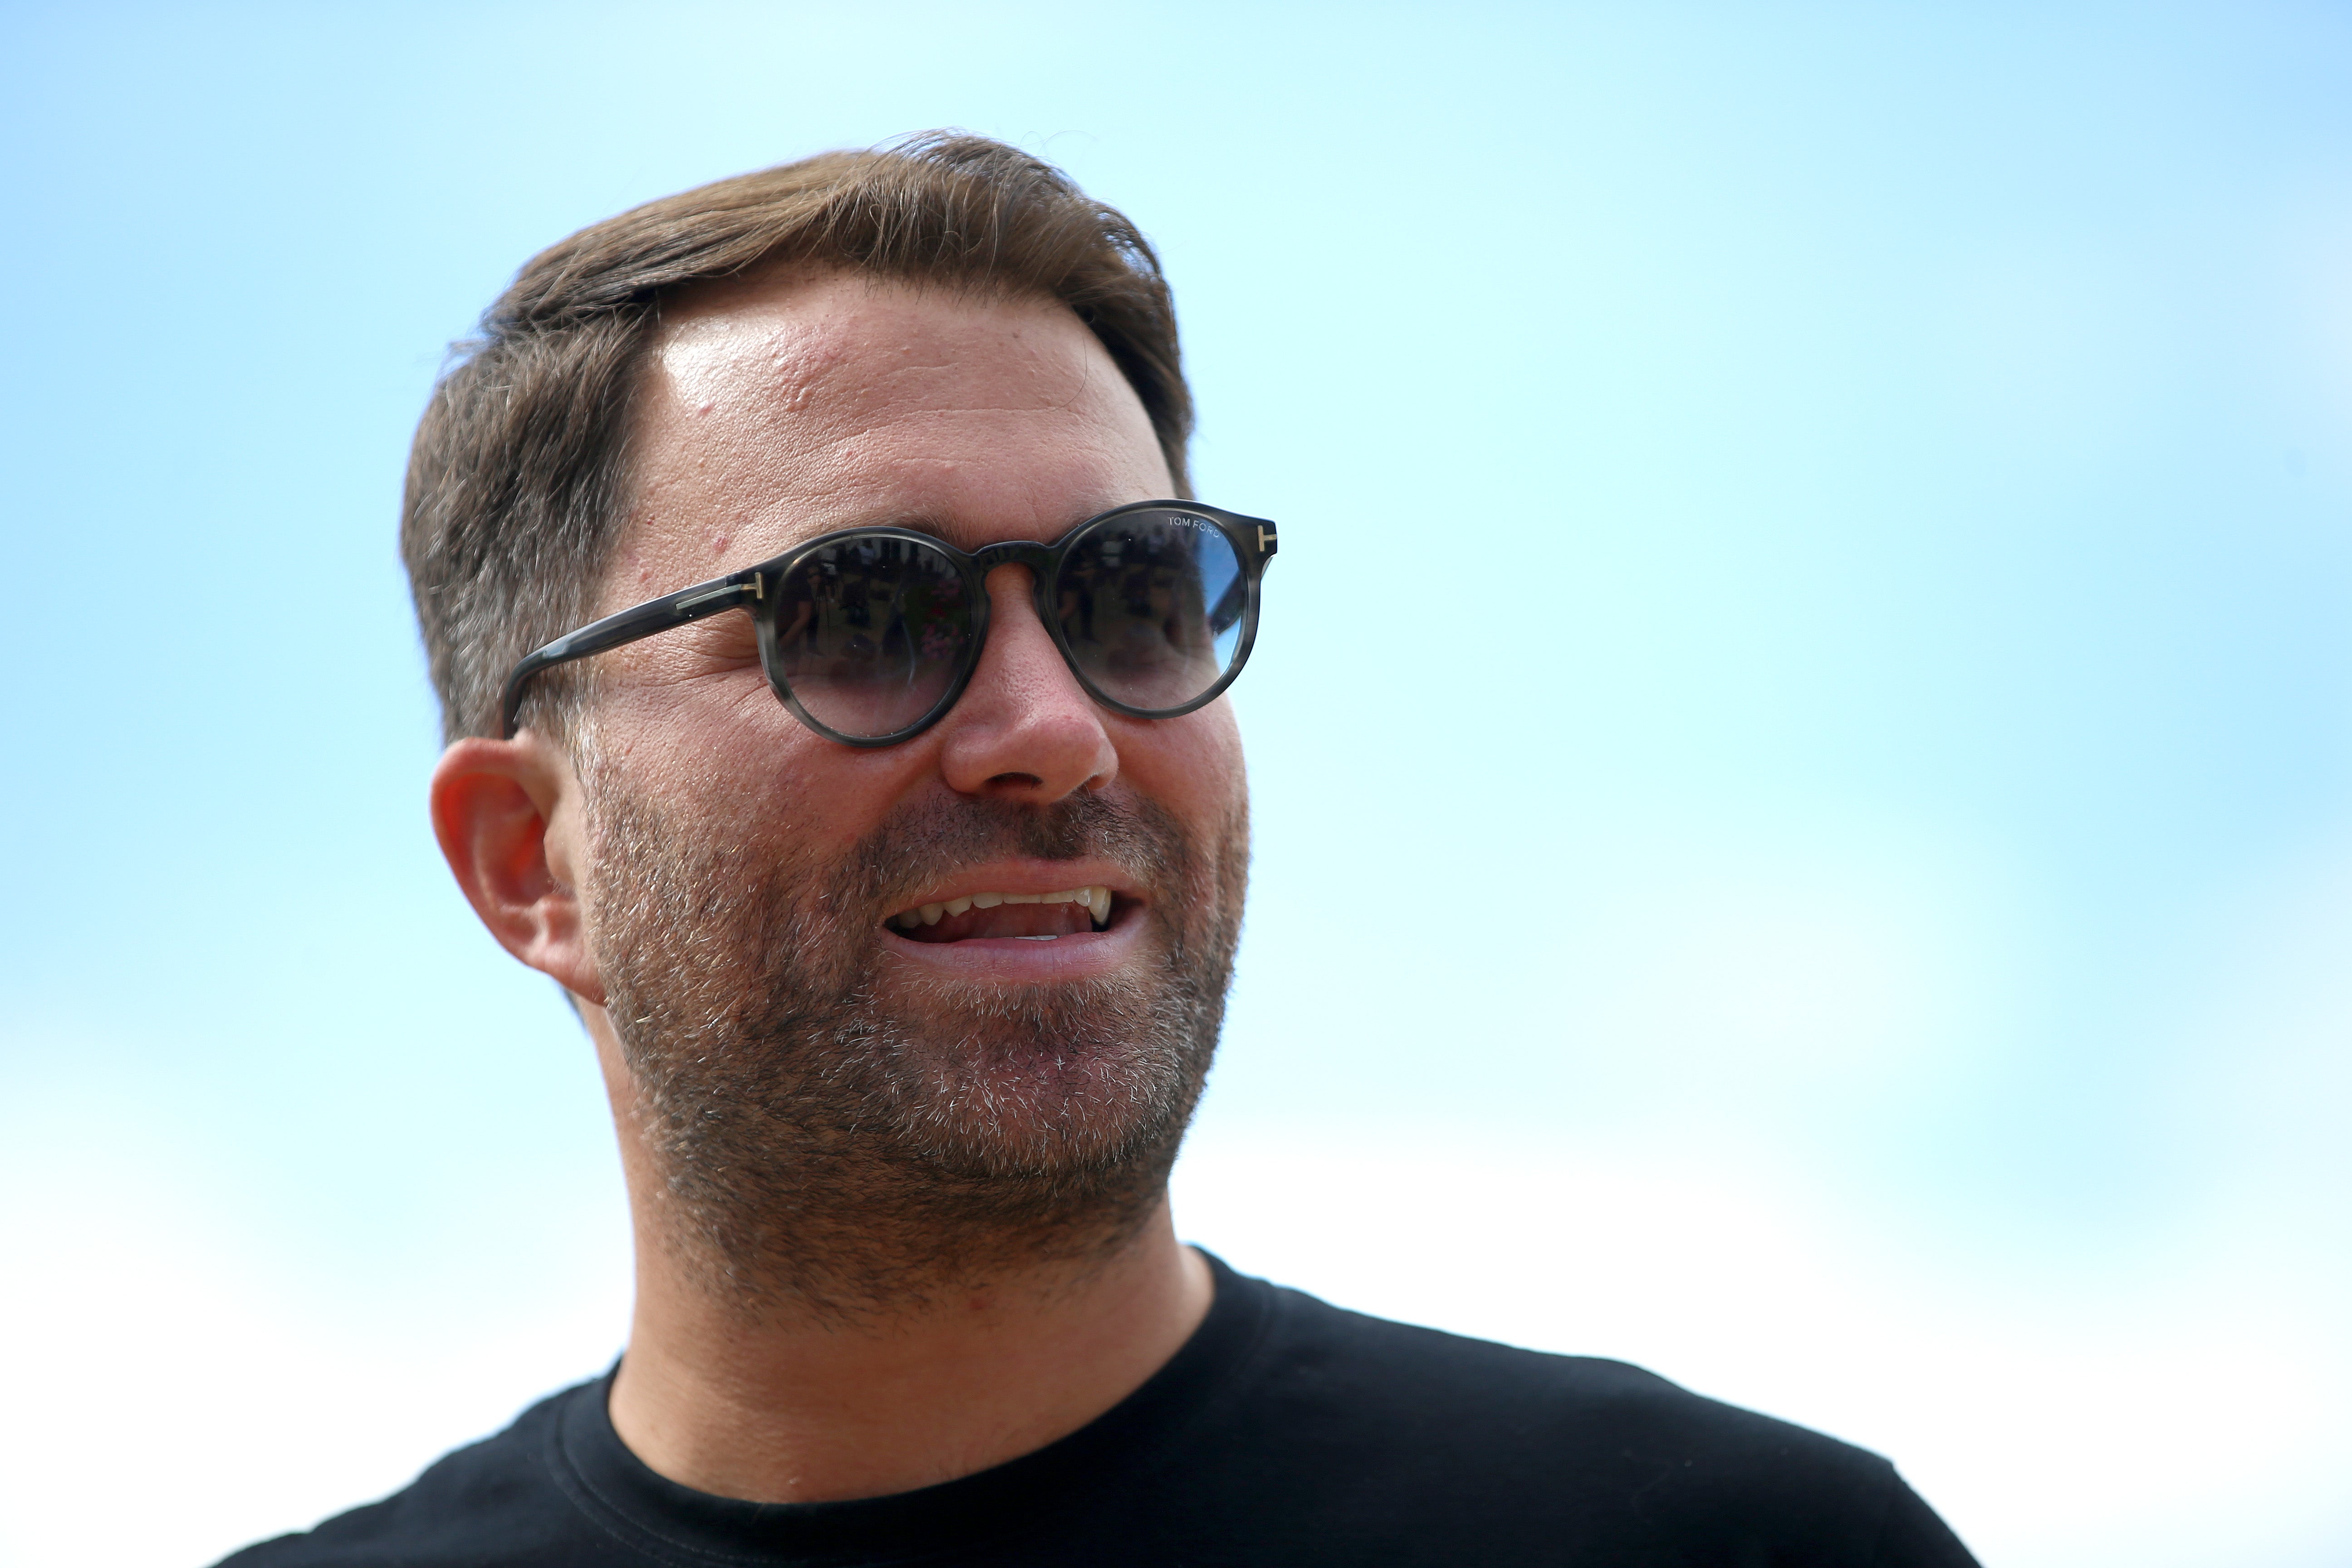 Eddie Hearn has spoken out against the split of bailout money